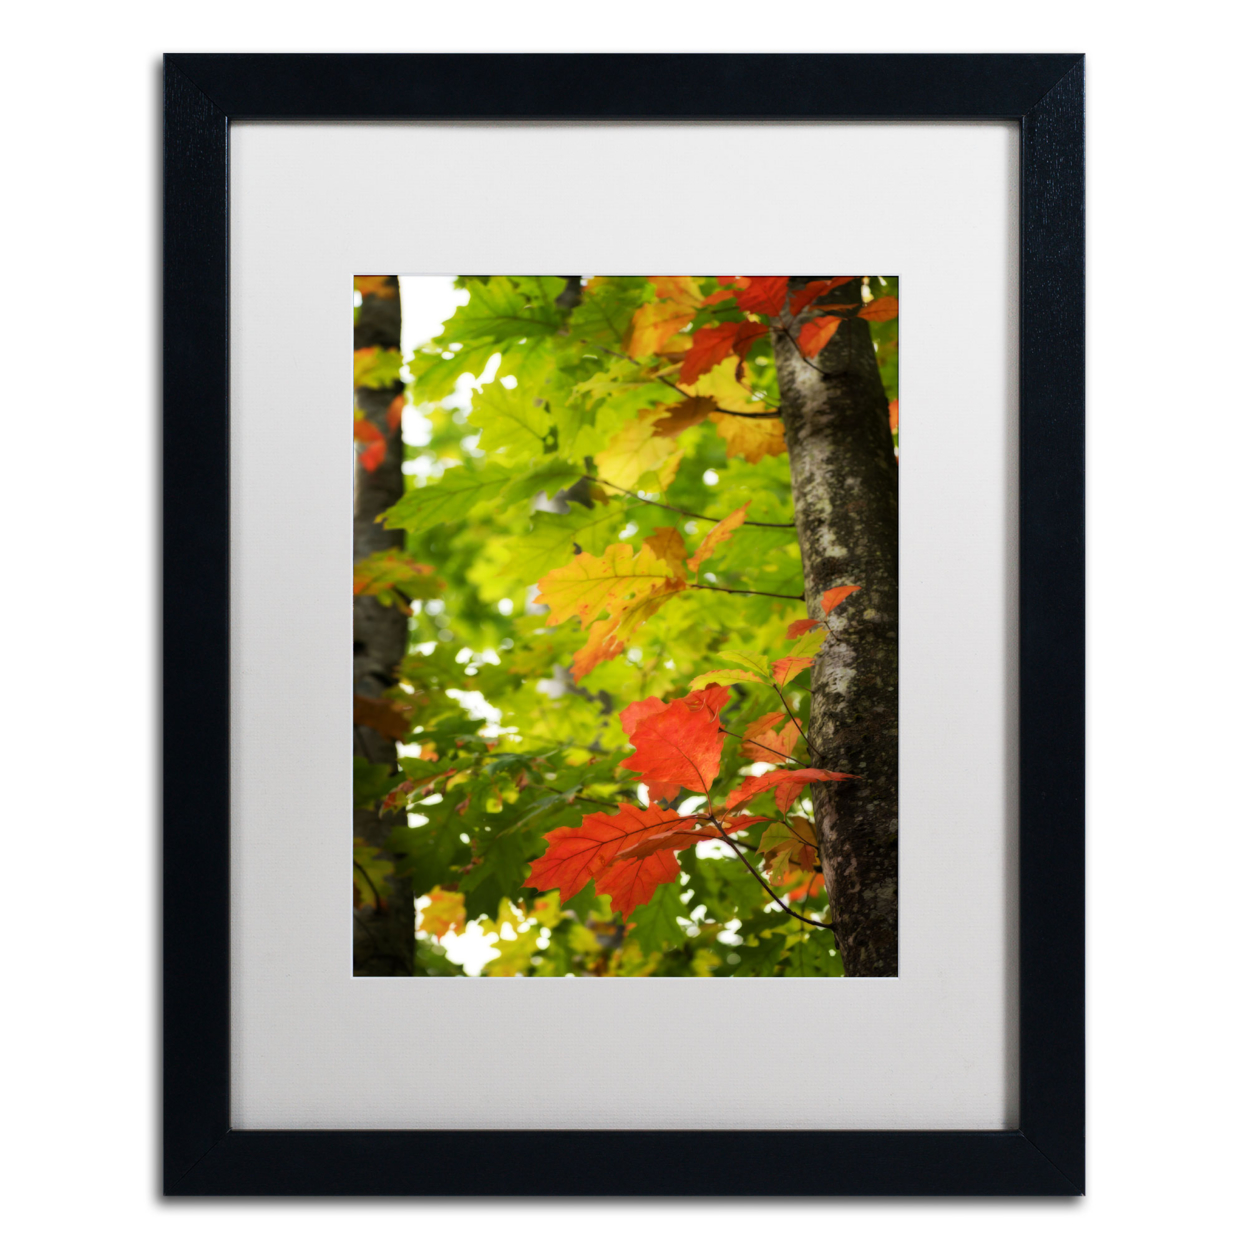 Philippe Sainte-Laudy 'Oak Leaves' Black Wooden Framed Art 18 X 22 Inches